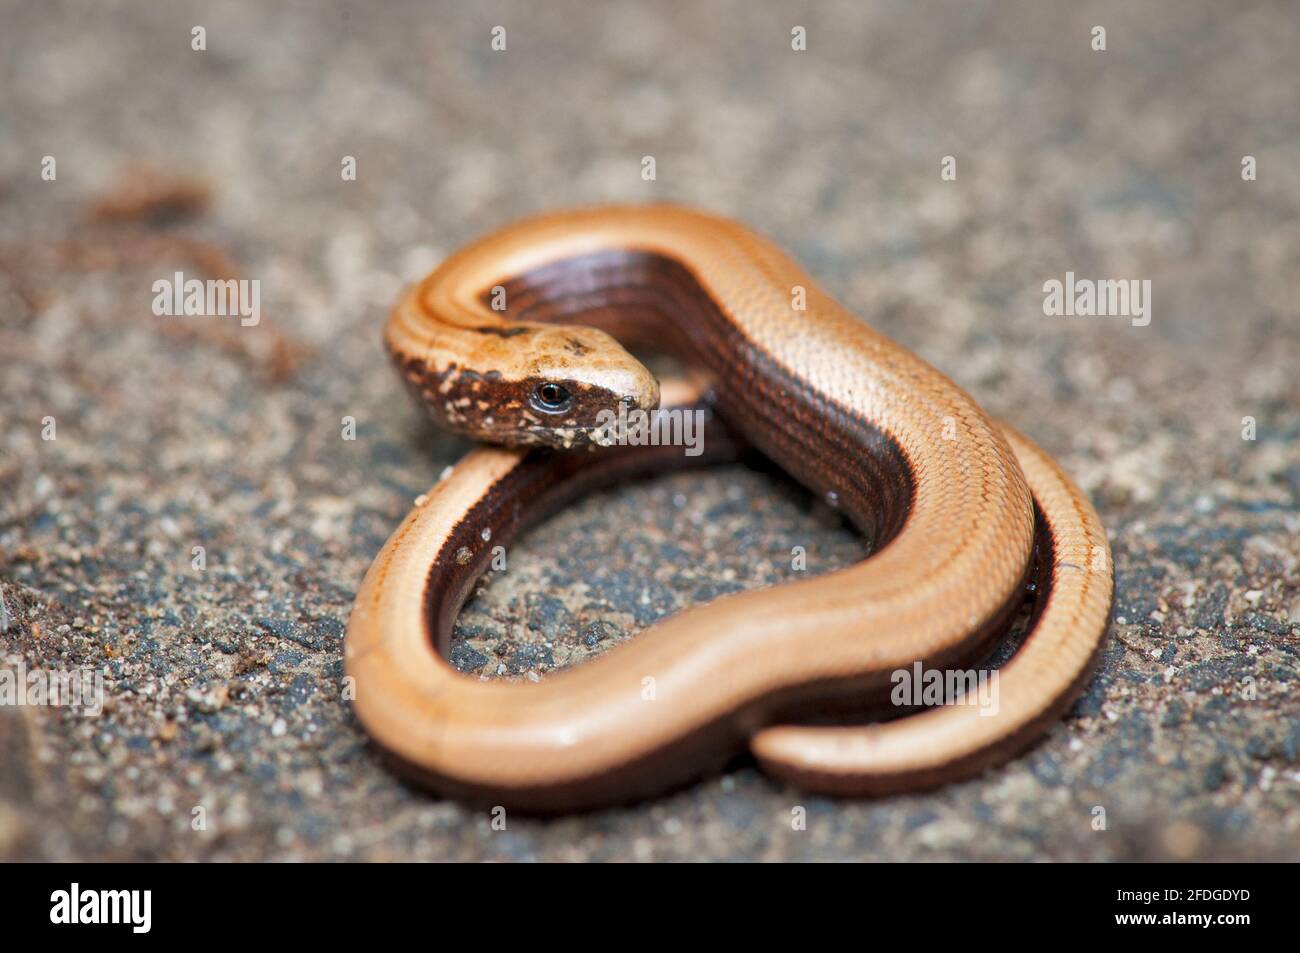 Small Blindworm basking on a rock. Stock Photo